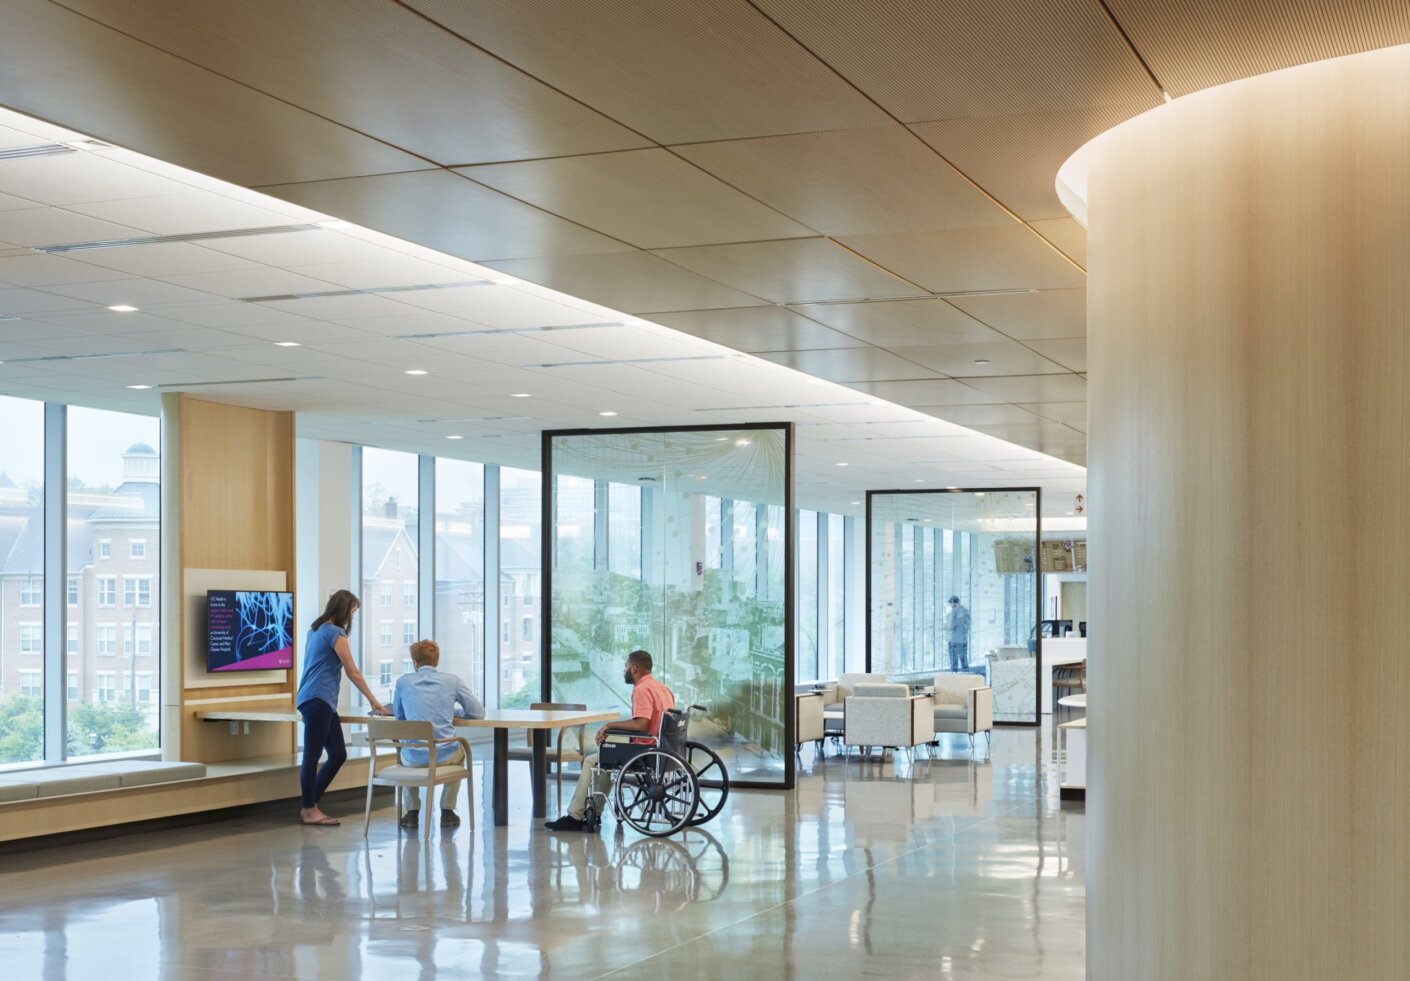 University of Cincinnati Gardner Neurological Institute. Main lobby that contains multi use areas for learning and waiting, museum, café, and classrooms. The spaces are divided by glass panels that contain artwork of the local culture of Cincinnati.